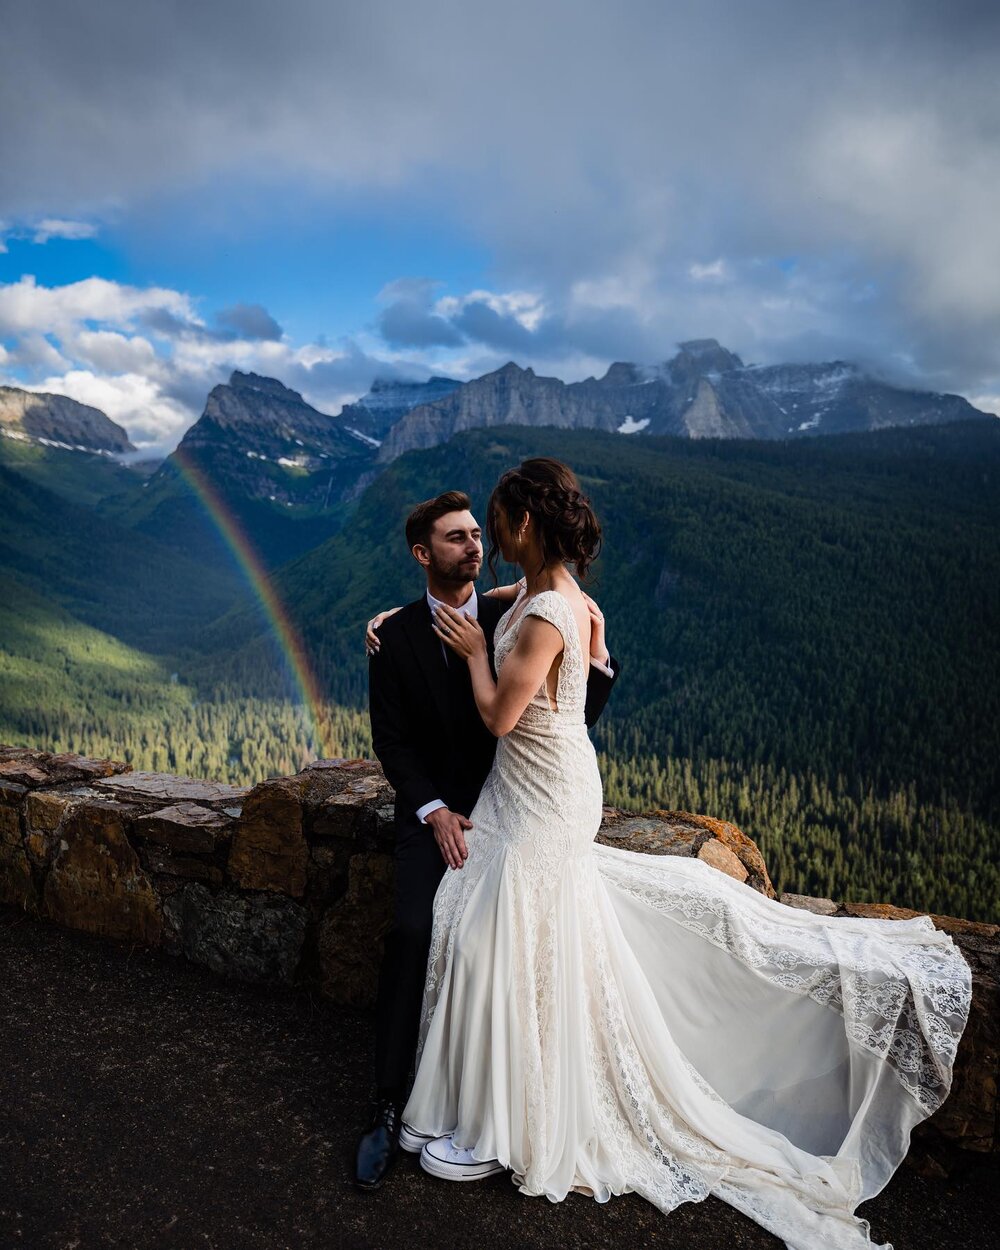 Sometimes it&rsquo;s like the rainbows just know it&rsquo;s an elopement day so they put on a show to celebrate! 🌈

Photographer: @lindseyjanephotographer
Celebrant: @marryin.berry 
Makeup: @cloud_marcela 
Hair: @boundlessbeautystudio 
Cake: @mounta